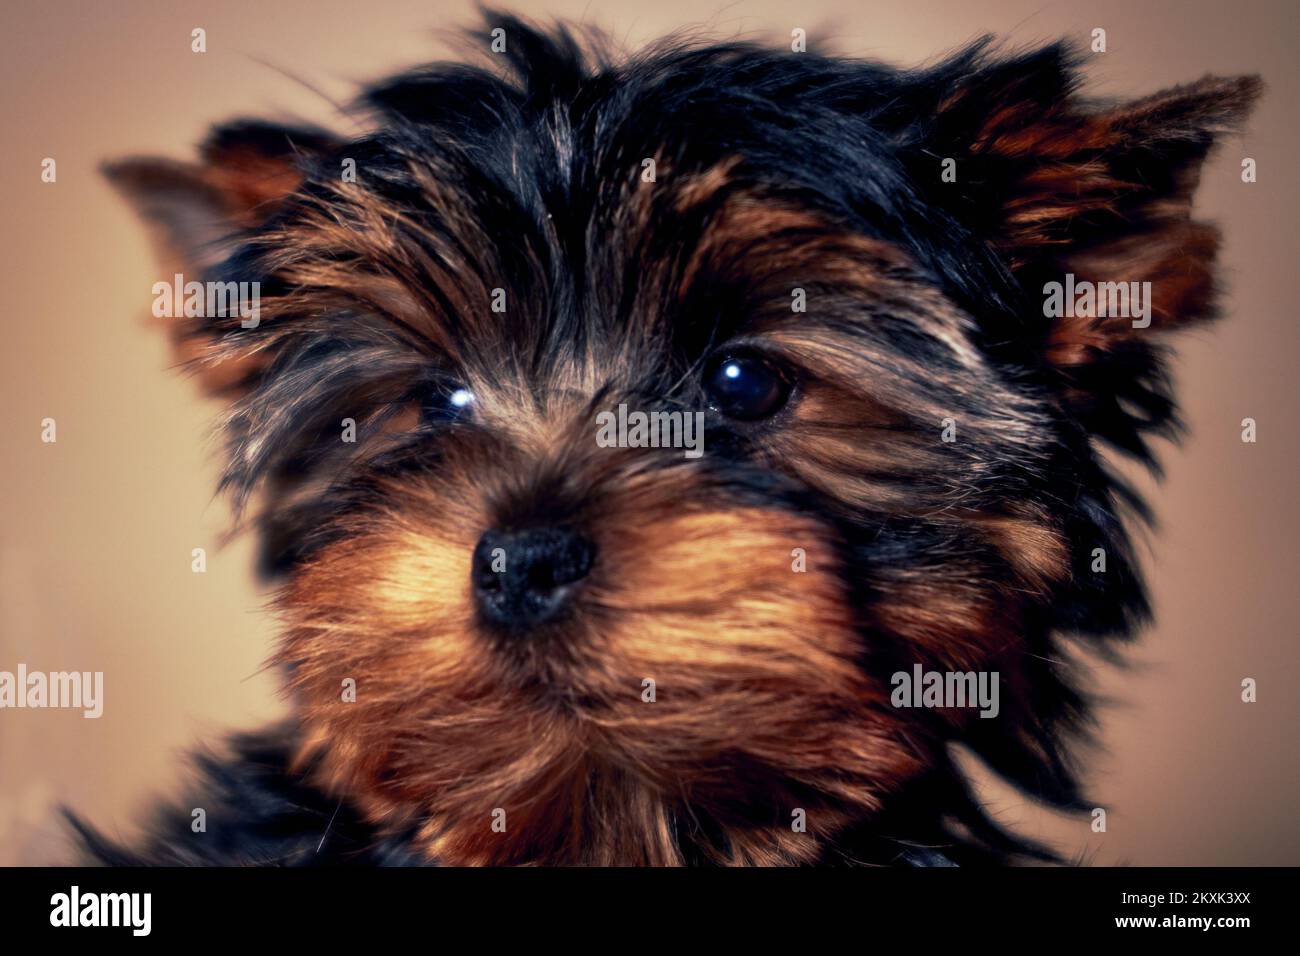 Close-up portrait of a Yorkshire terrier puppy Stock Photo